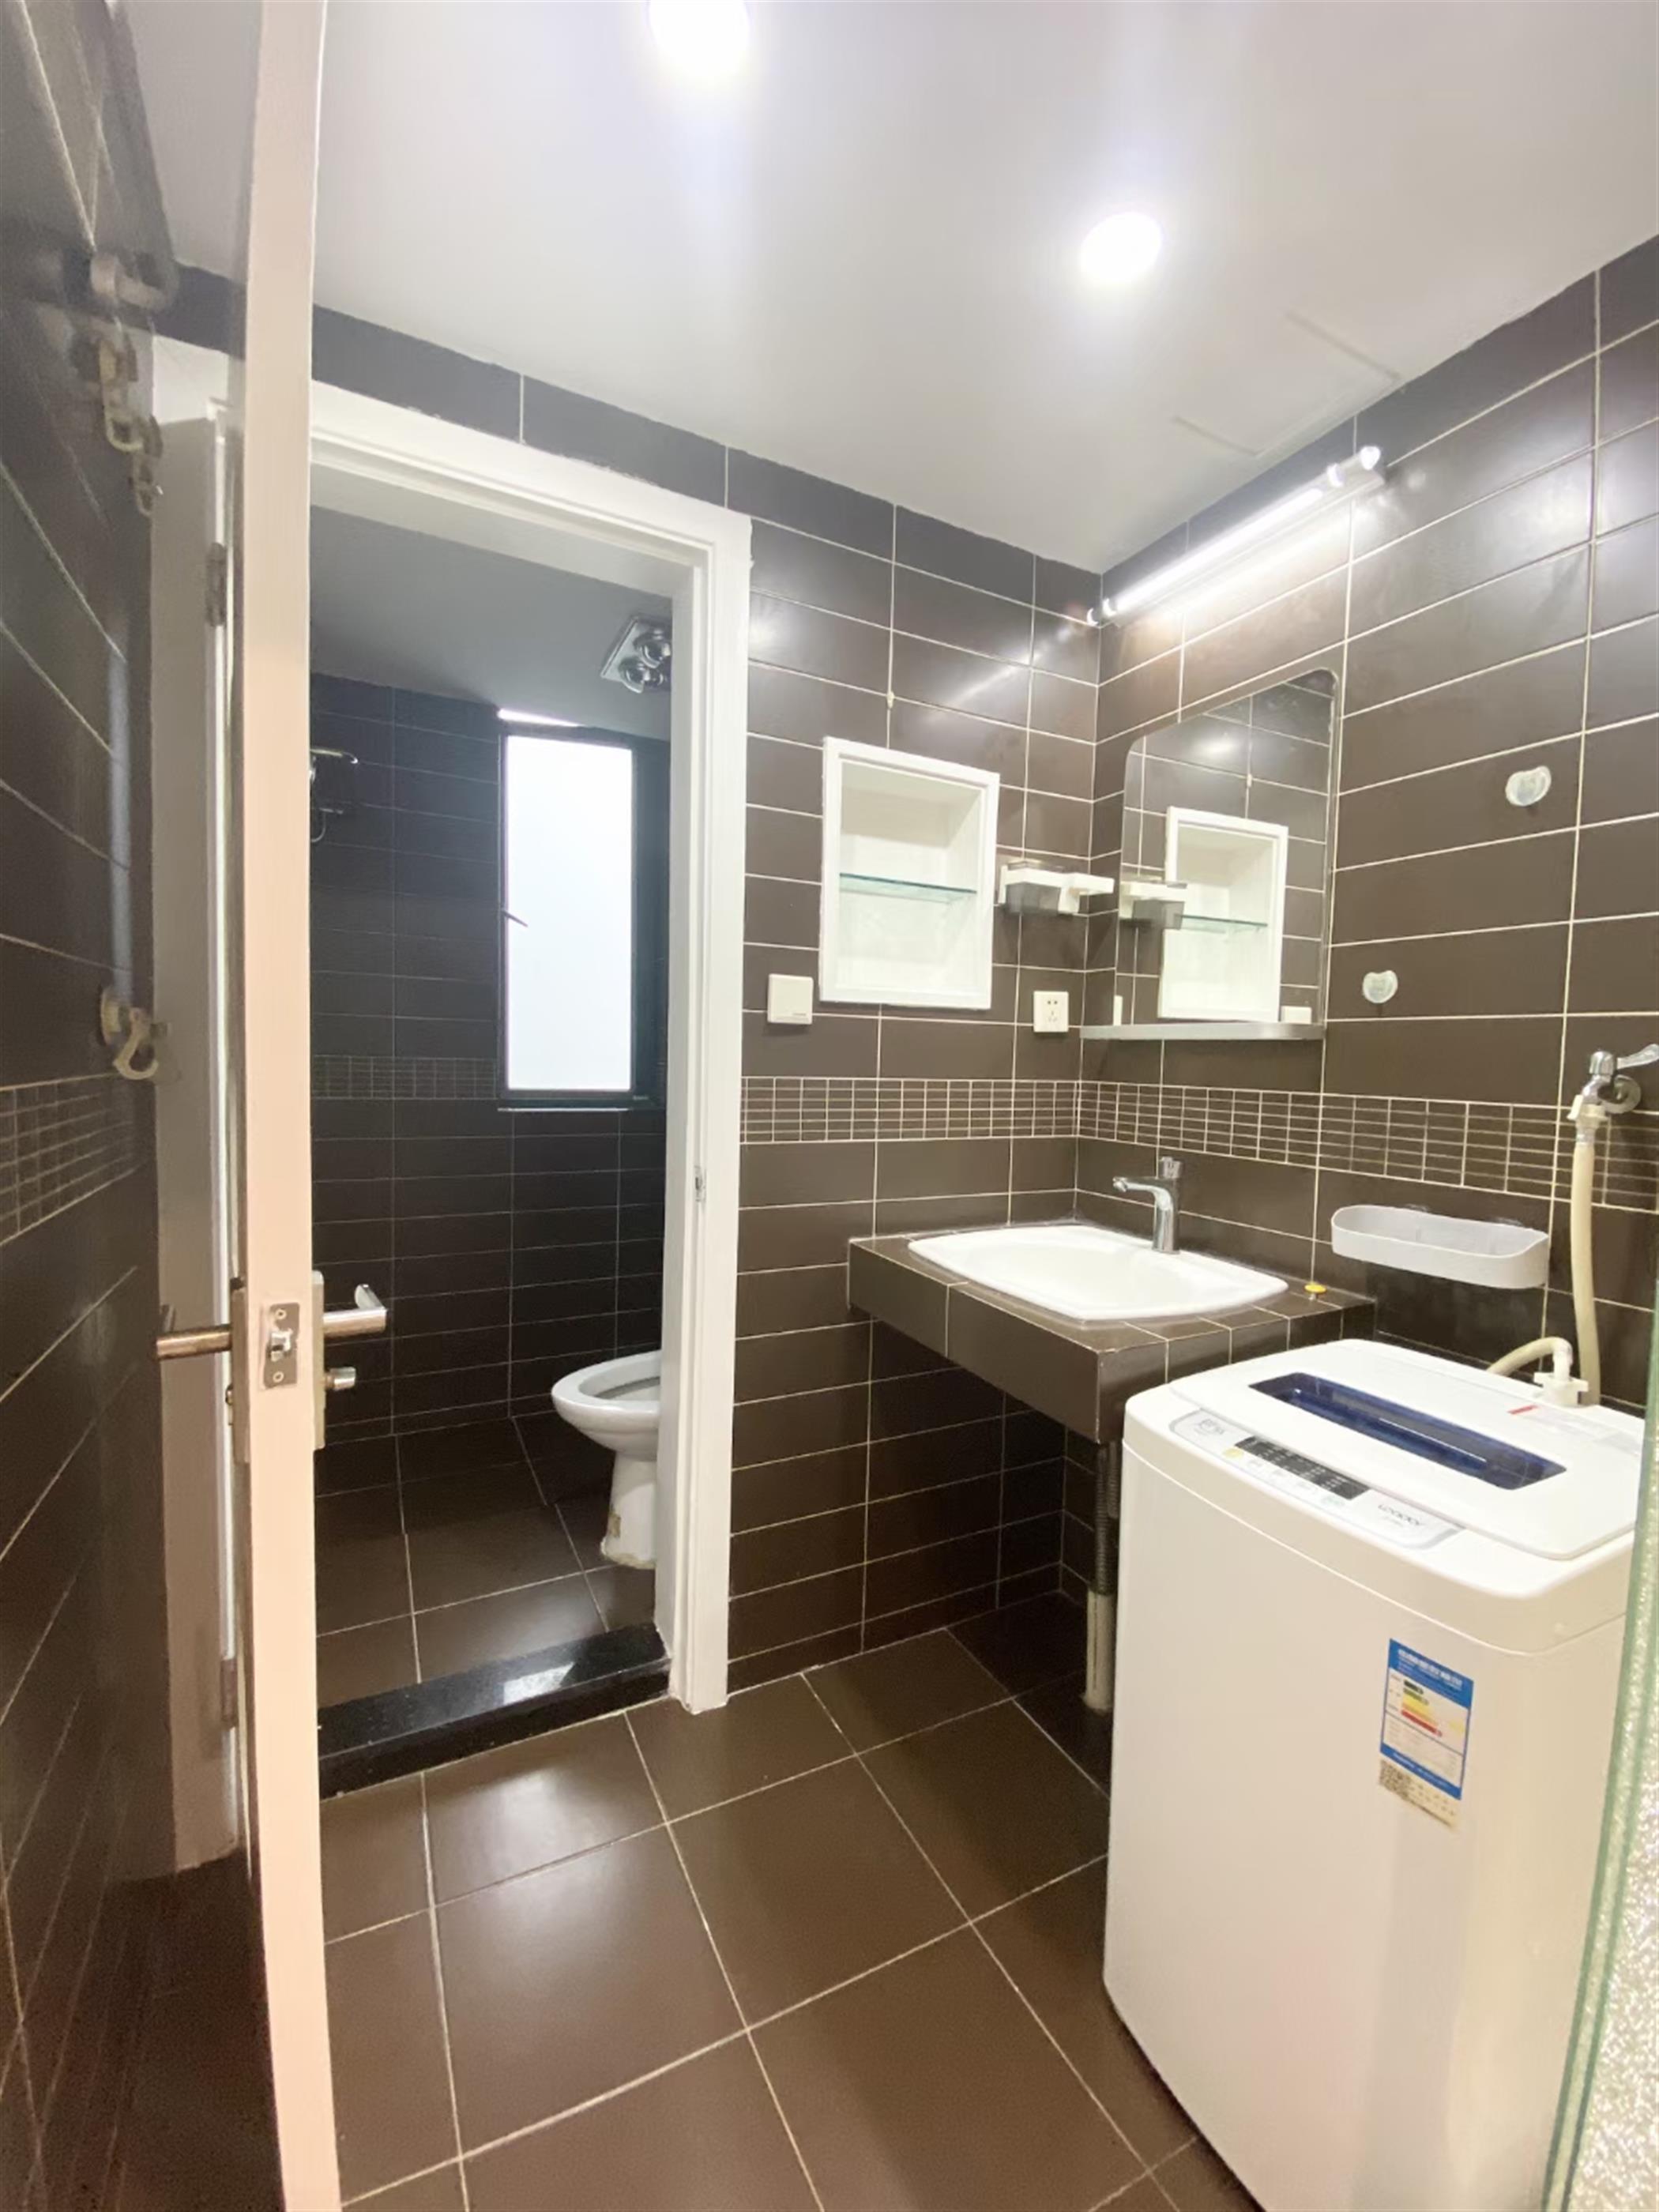 clean bathroom Spacious Newly Renovated 2BR Top of City Apt Nr Ln 2/12/13 for Rent in Shanghai